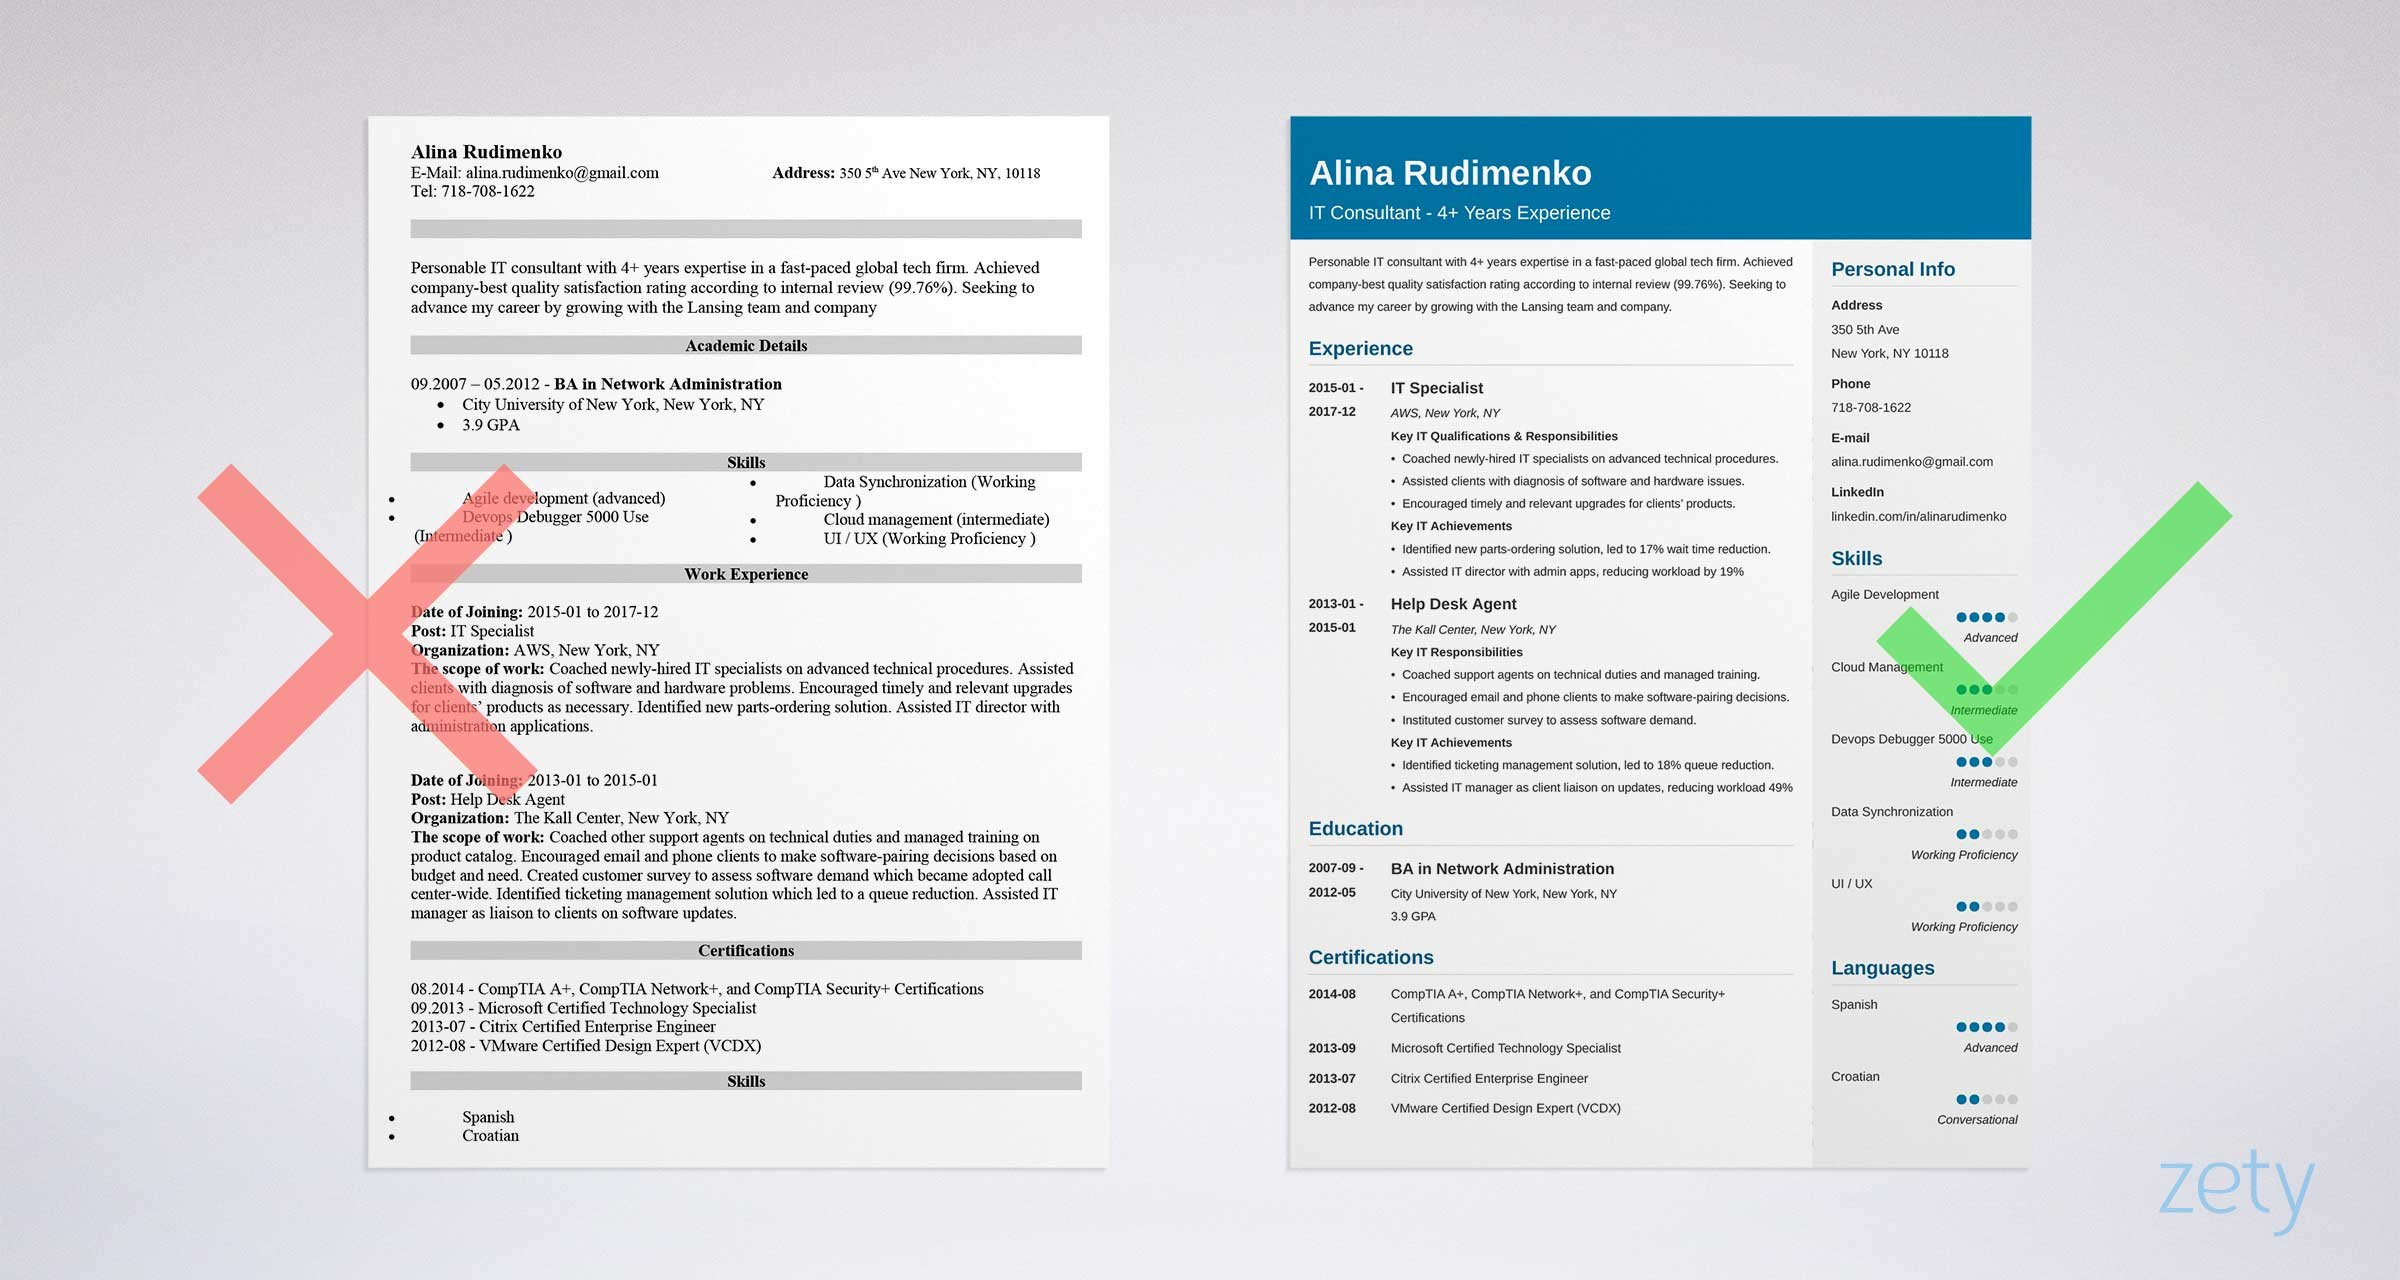 Resume Template for Experienced It Professionals 25lancarrezekiq Information Technology (it) Resume Examples for 2021